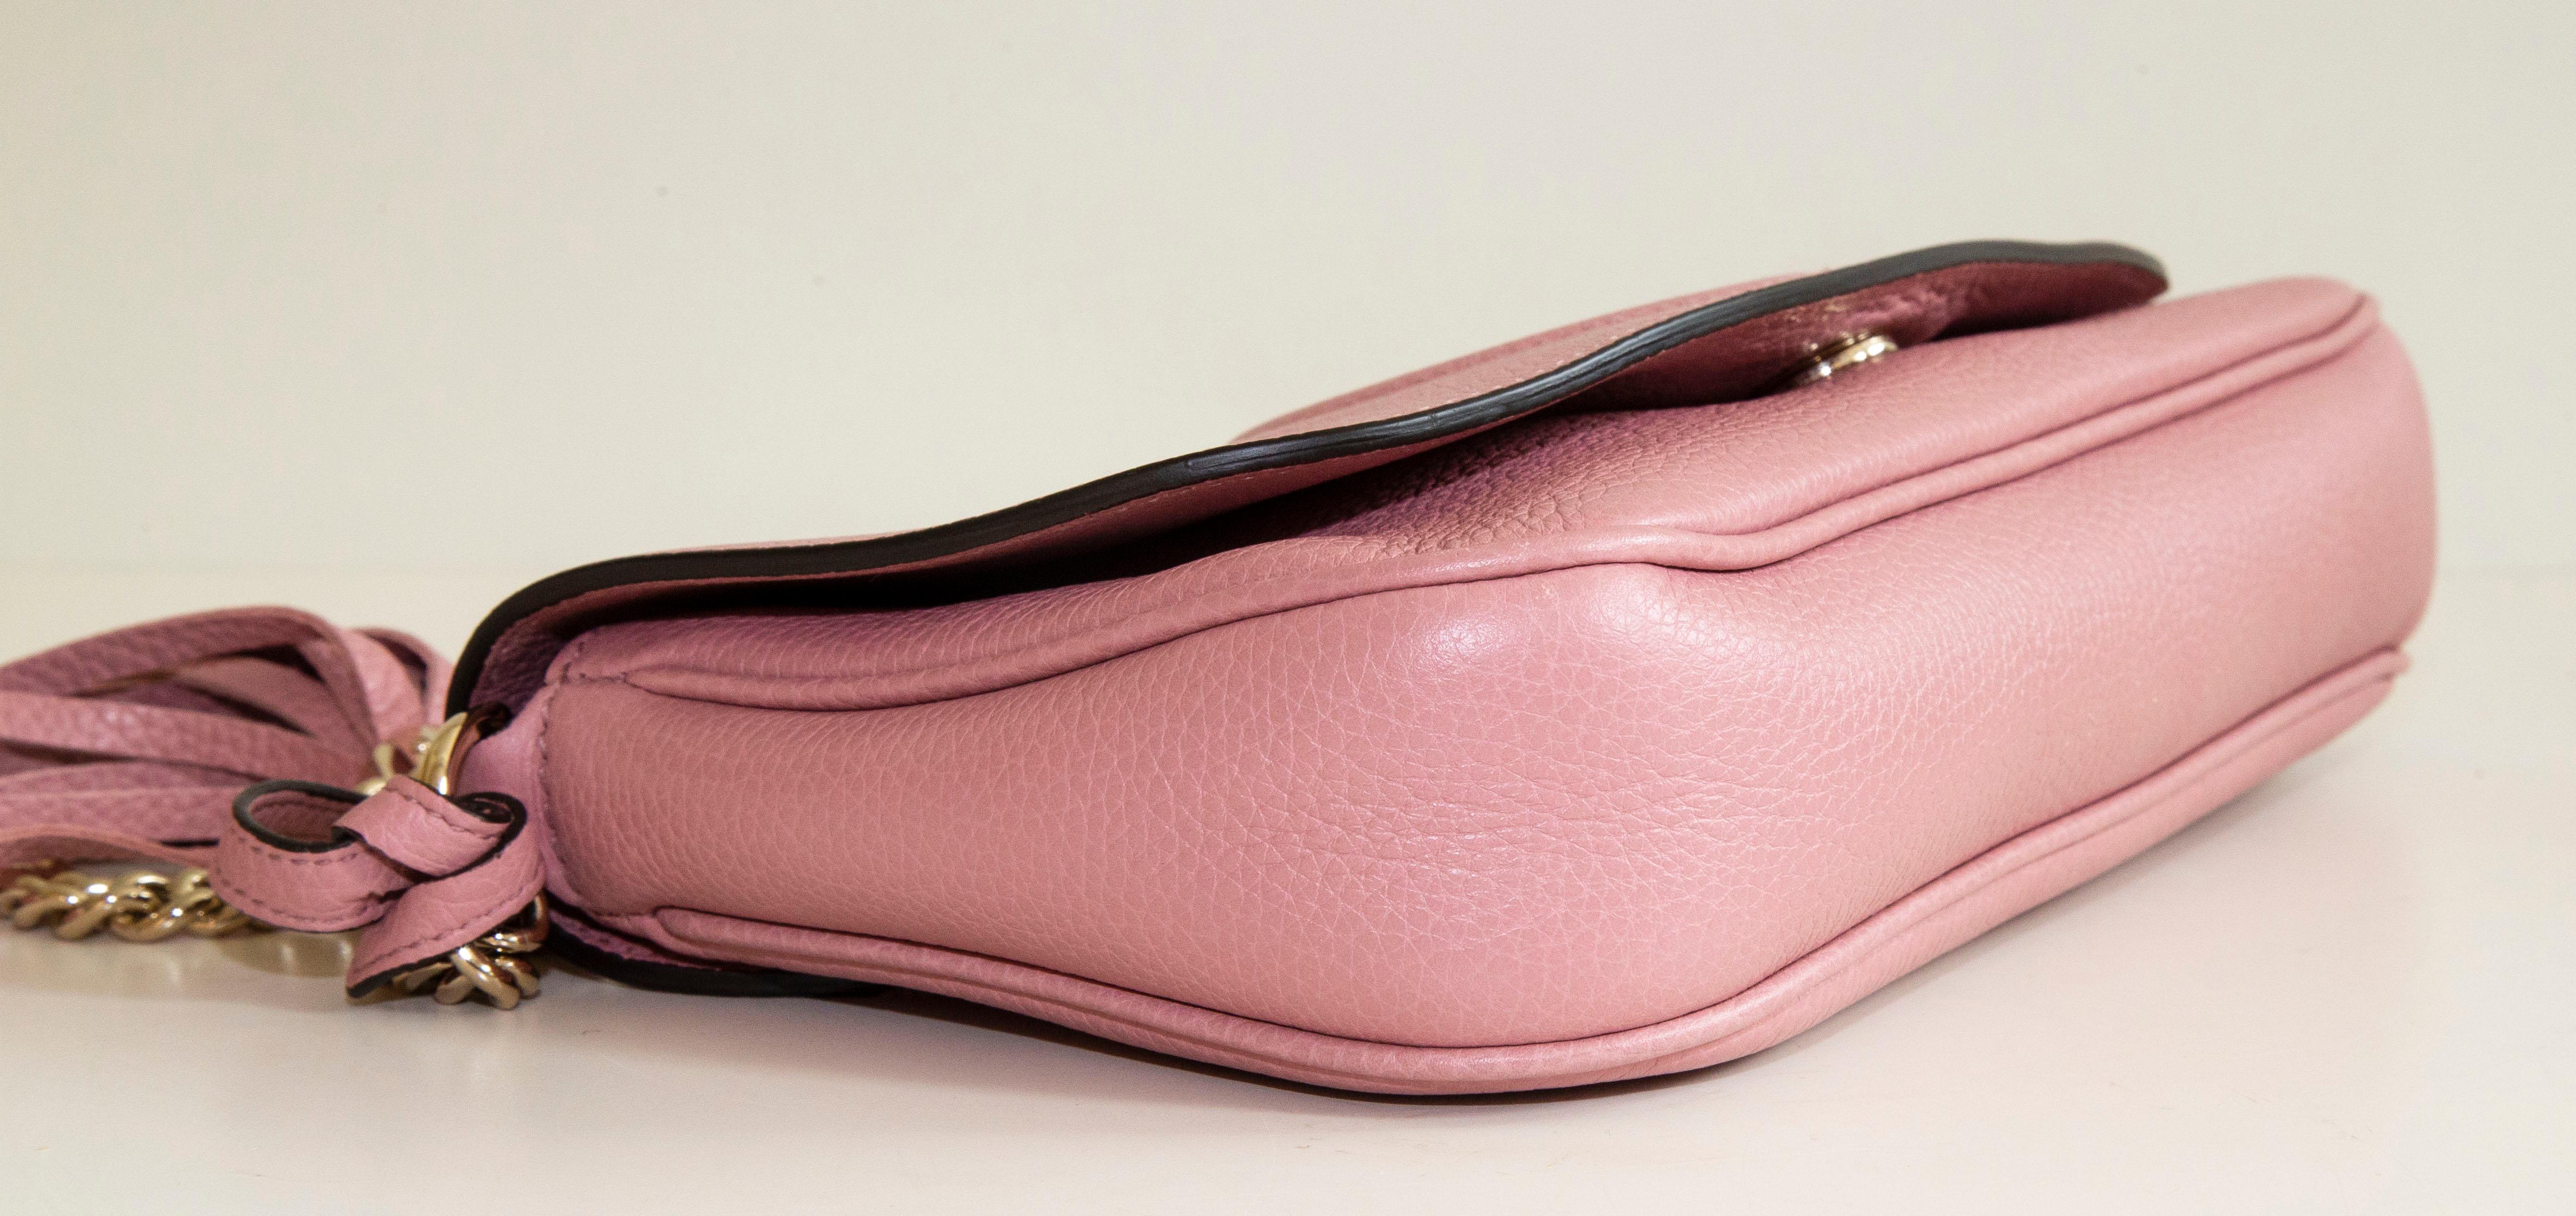 Gucci Soho Pink Leather Crossbody Bag In Excellent Condition For Sale In Arnhem, NL